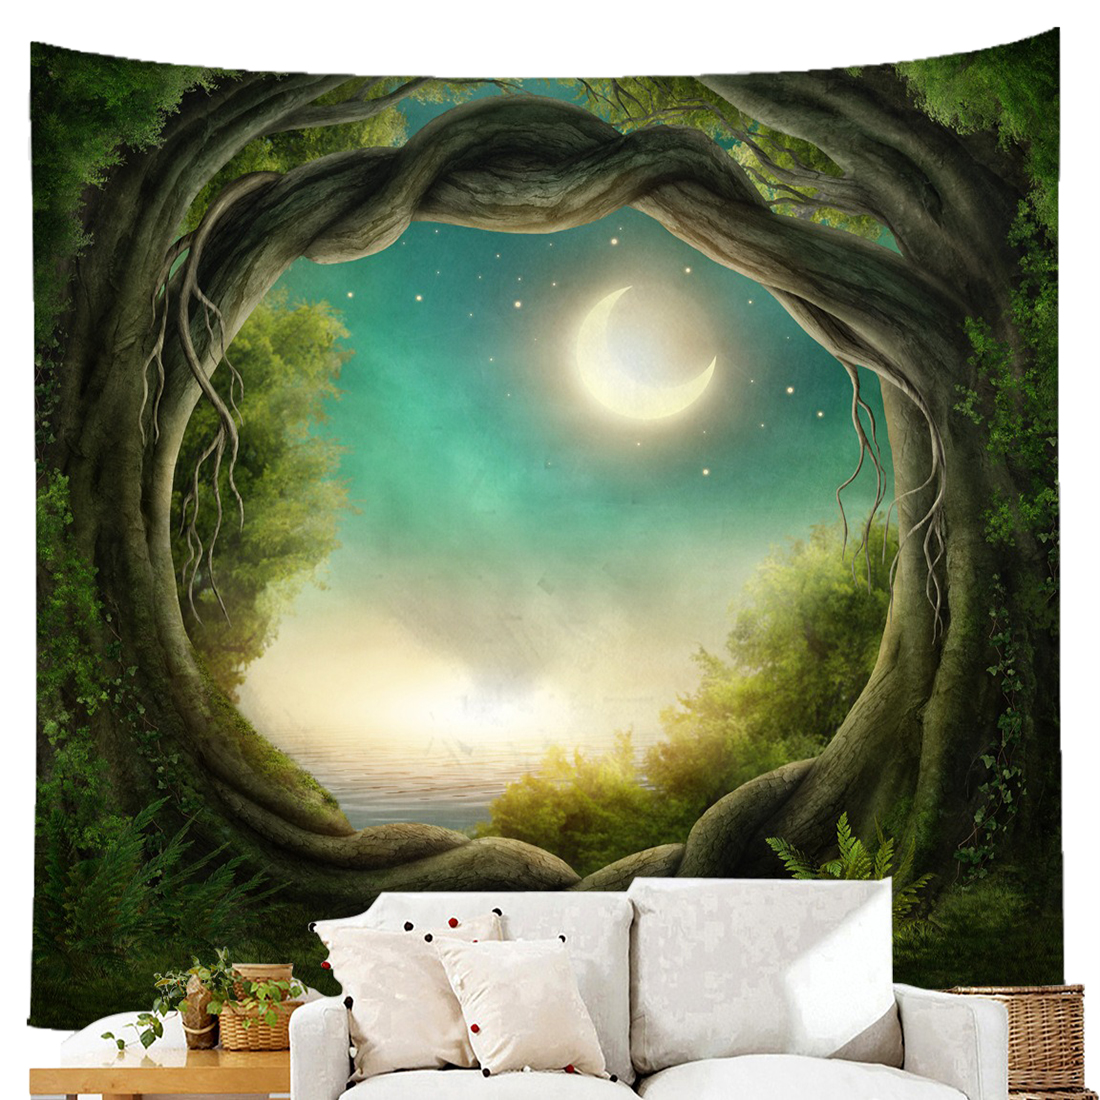 Polyester-Fancy-Moon-Light-Tapestry-Throw-Mat-Yoga-Rug-Wall-Hanging-Home-Decor-Art-Crafts-1482752-4